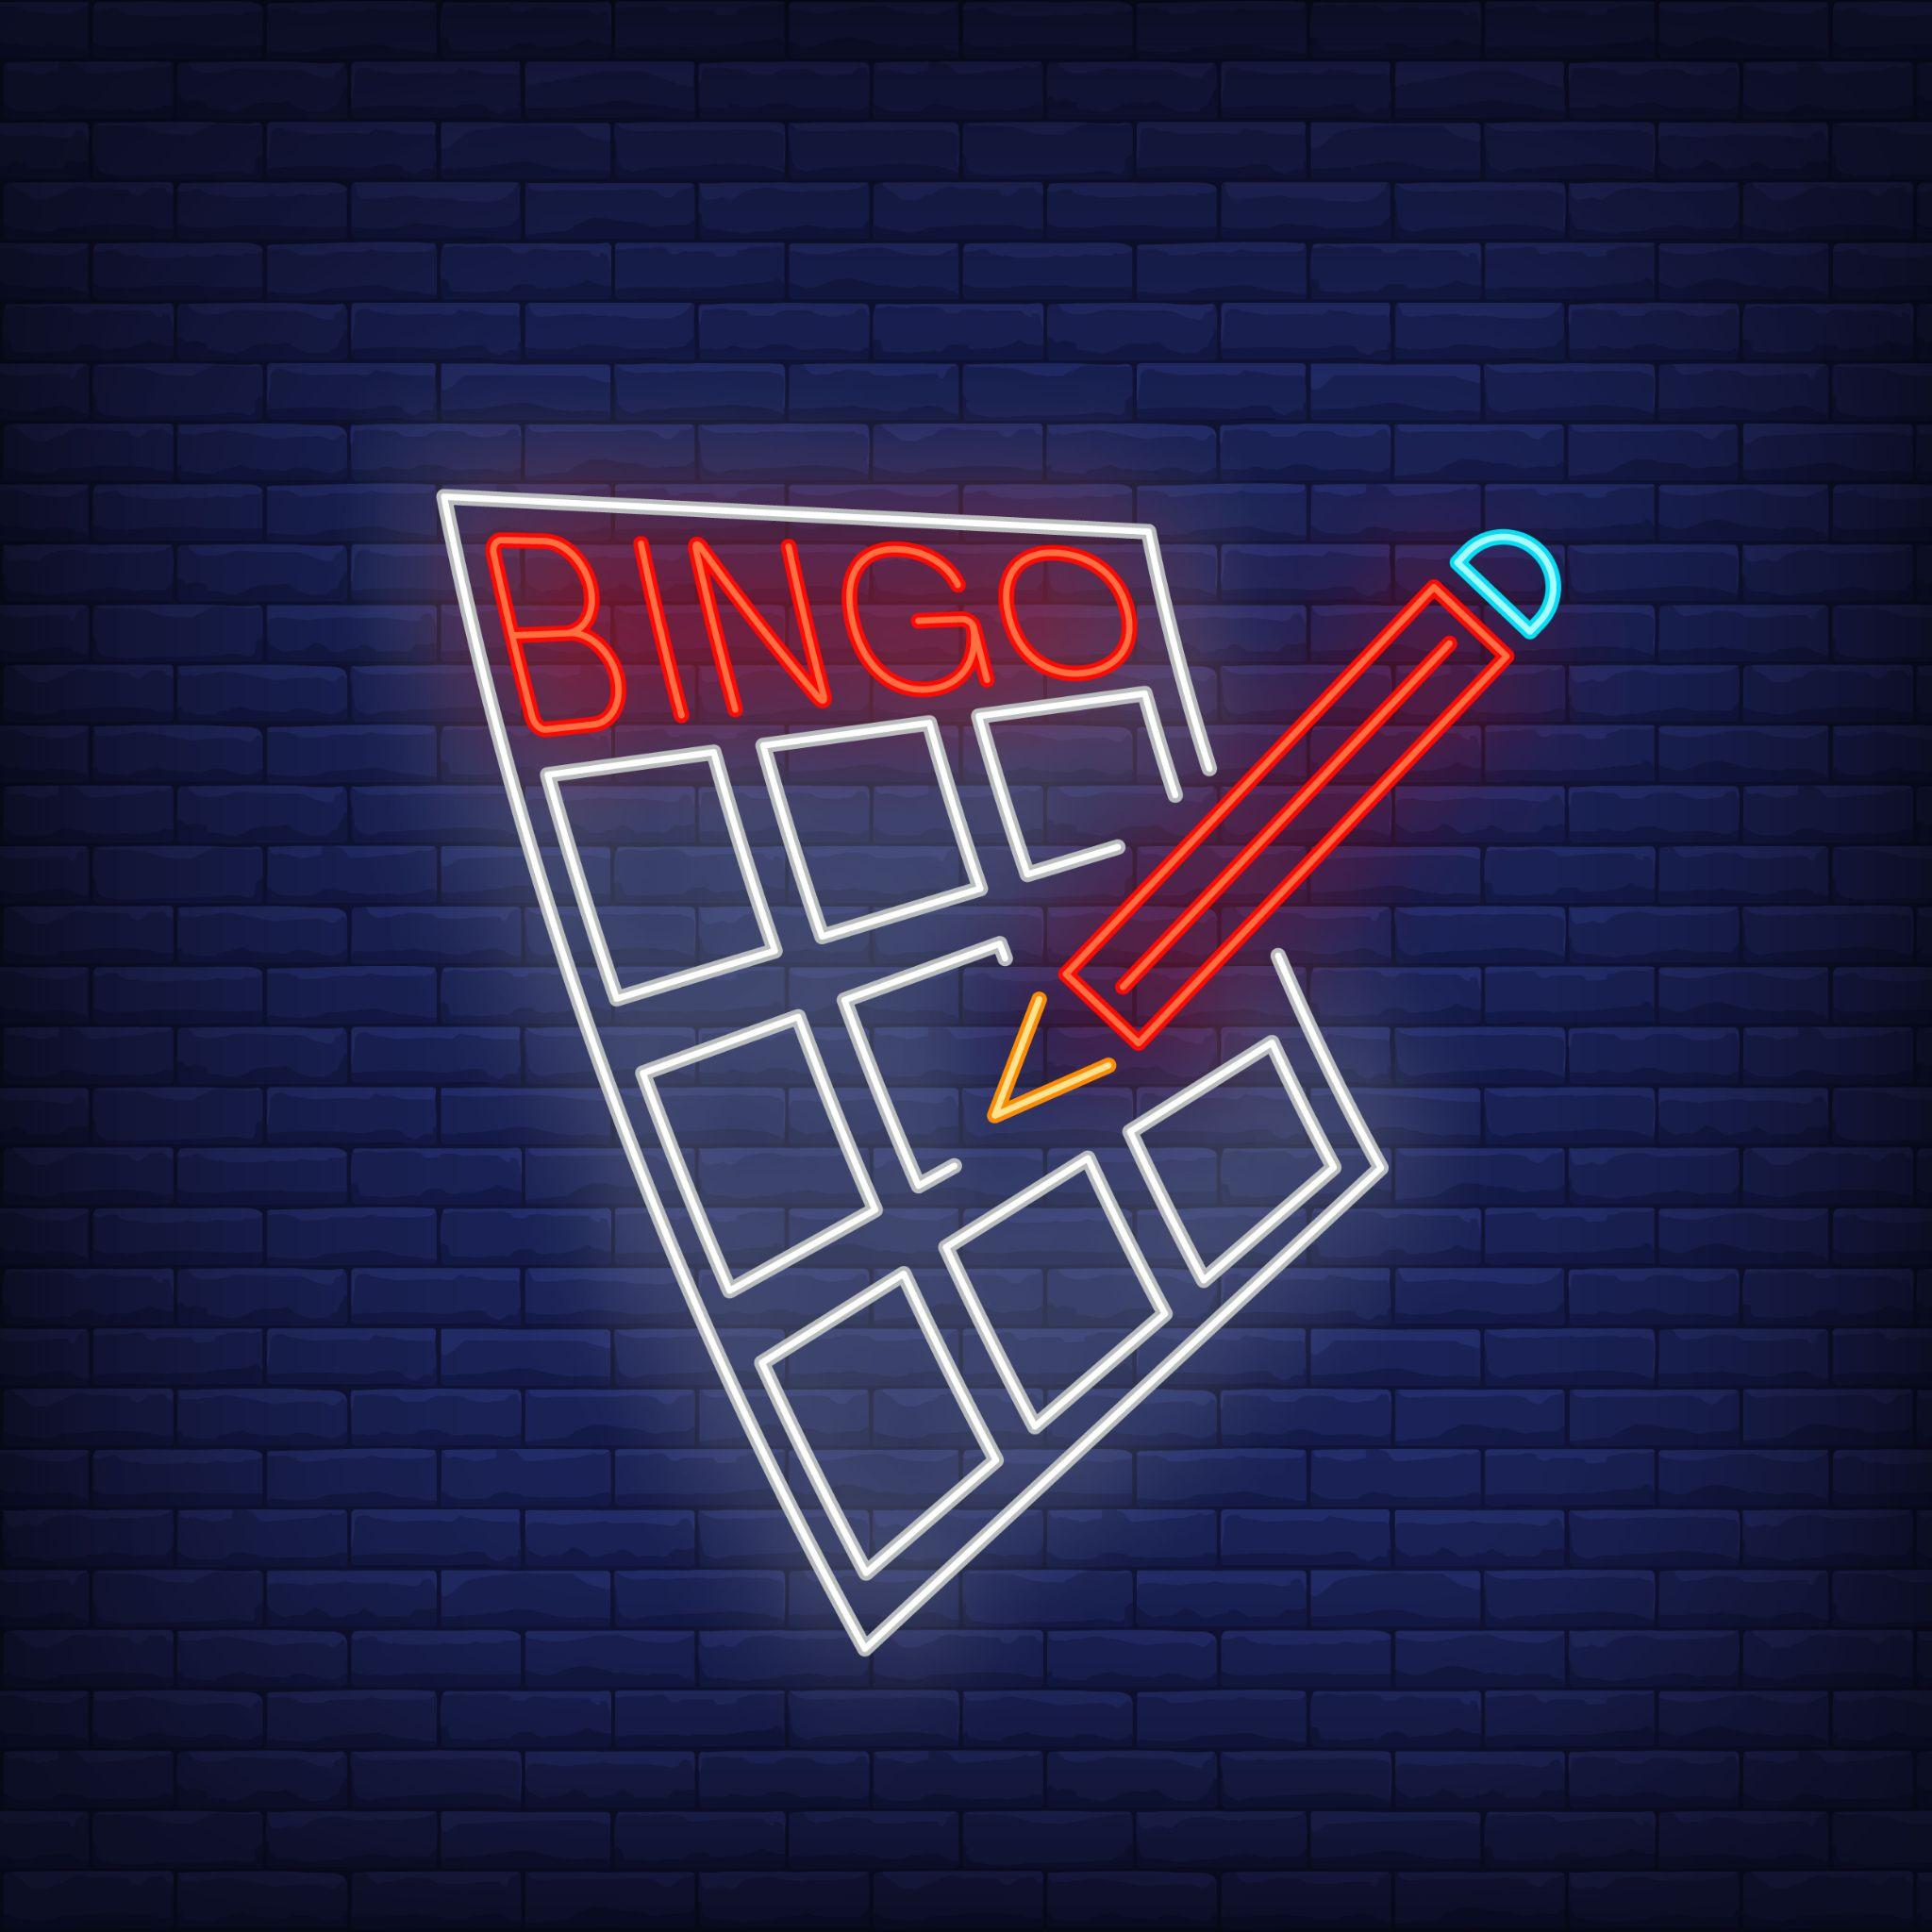 How the pandemic played a key role in popularizing online bingo games?